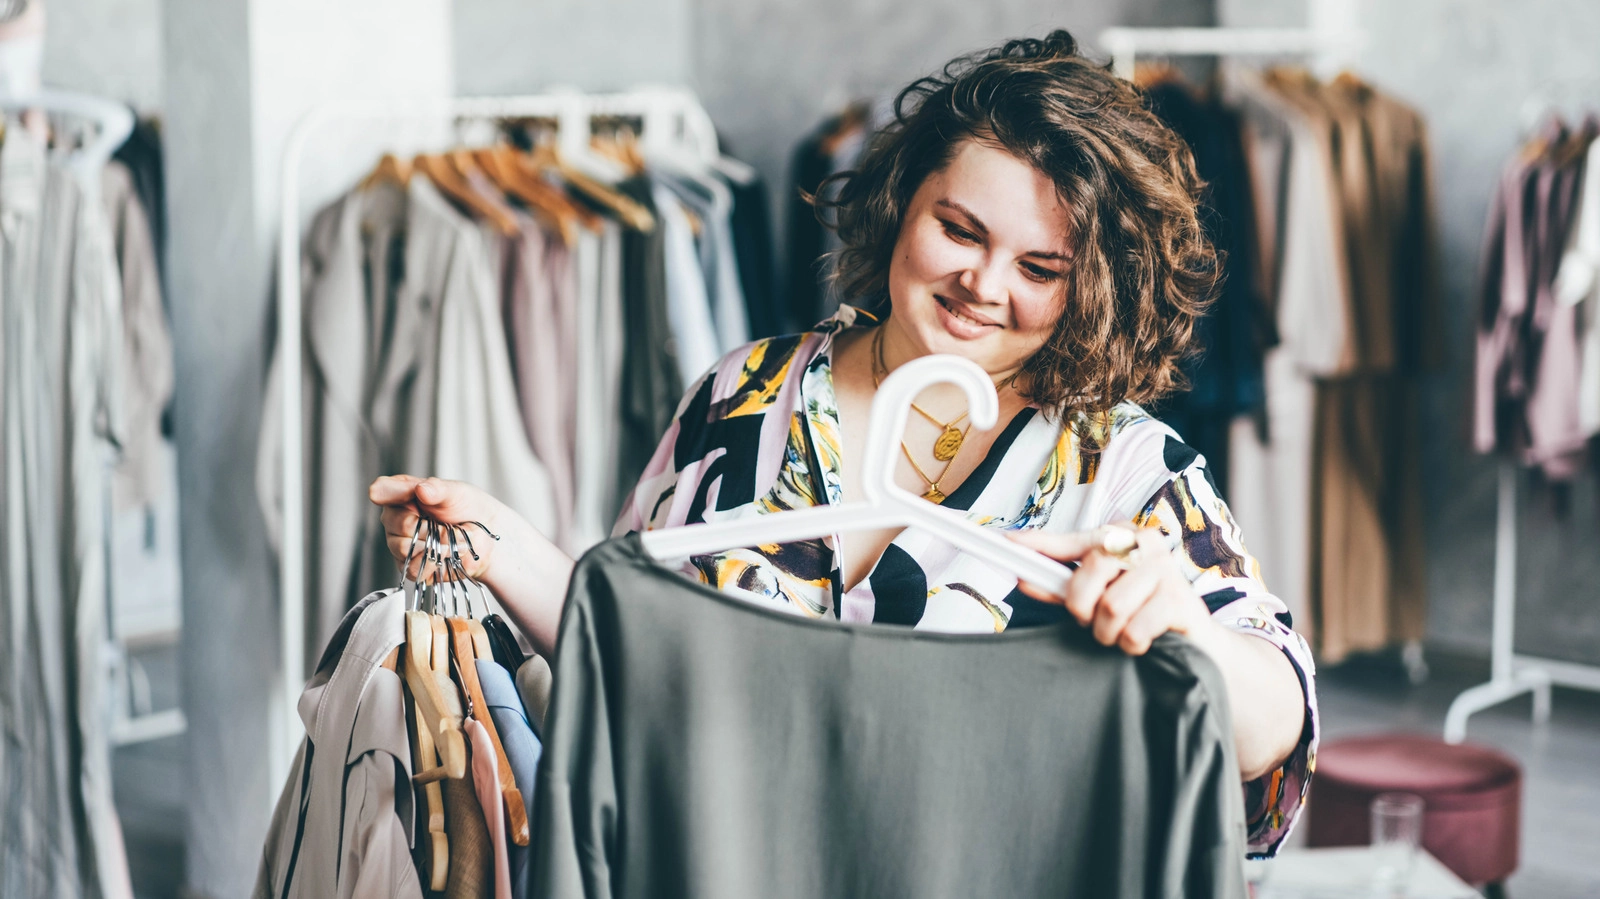 TOP 20 investment opportunities in the fashion industry